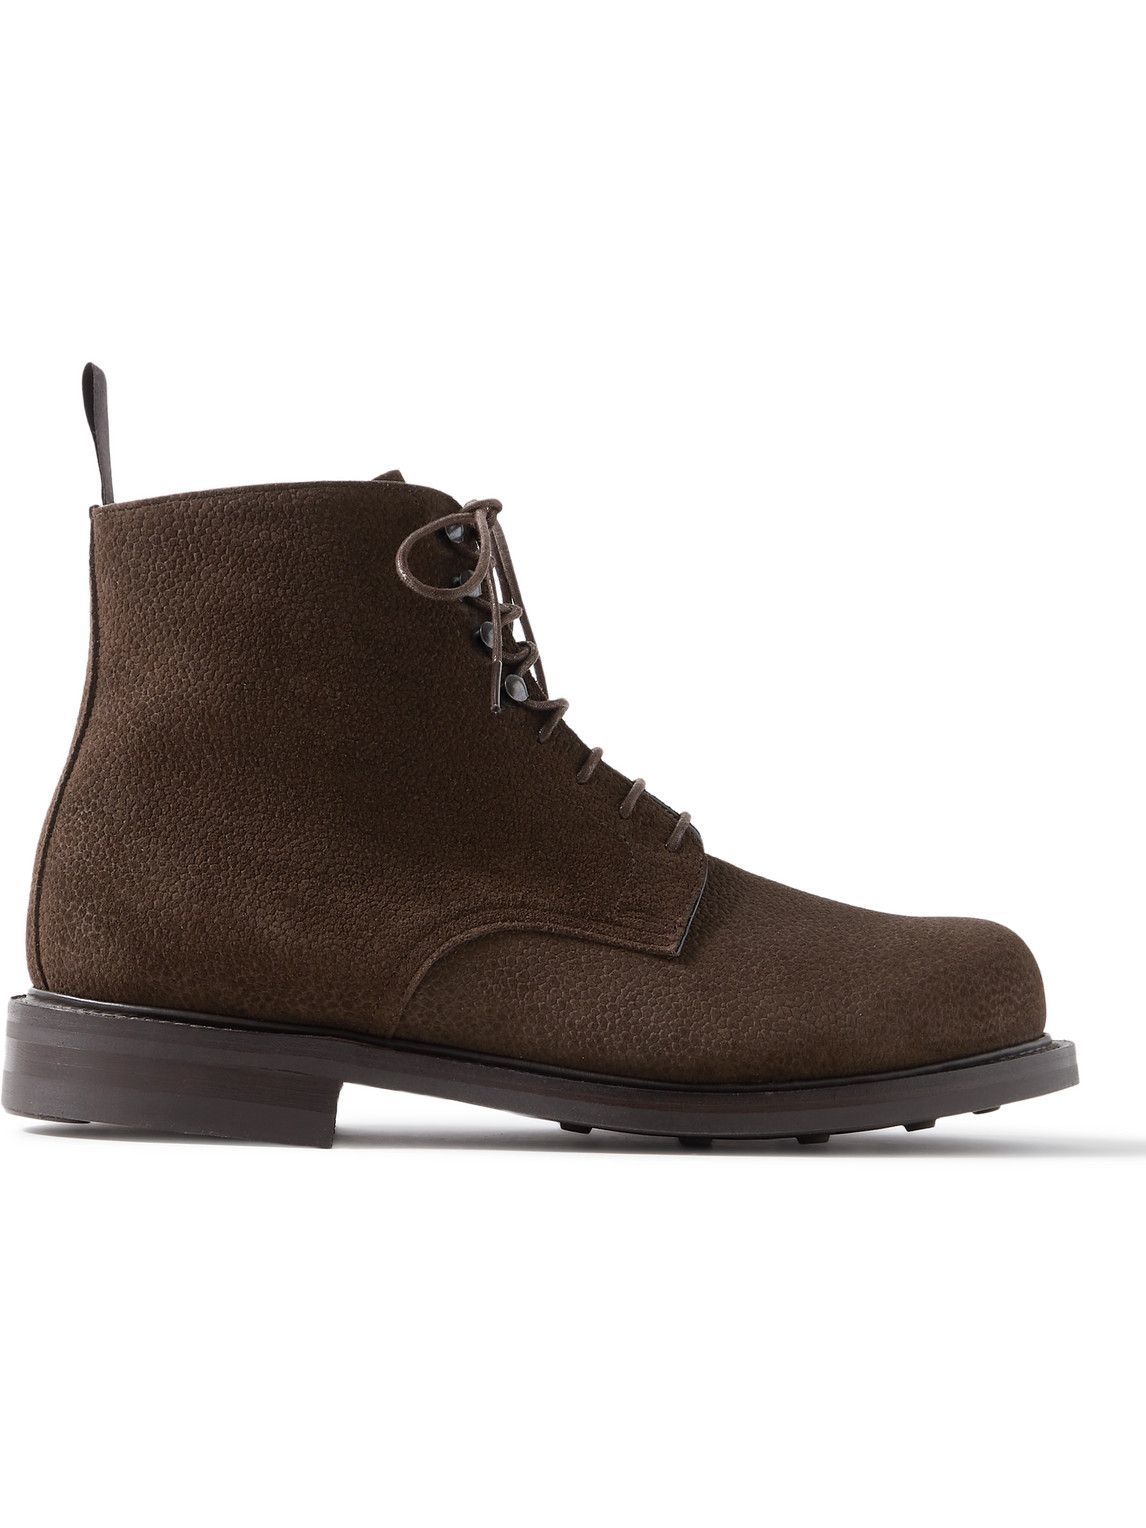 George Cleverley - Jacob Full-Grain Suede Chukka Boots - Brown George ...